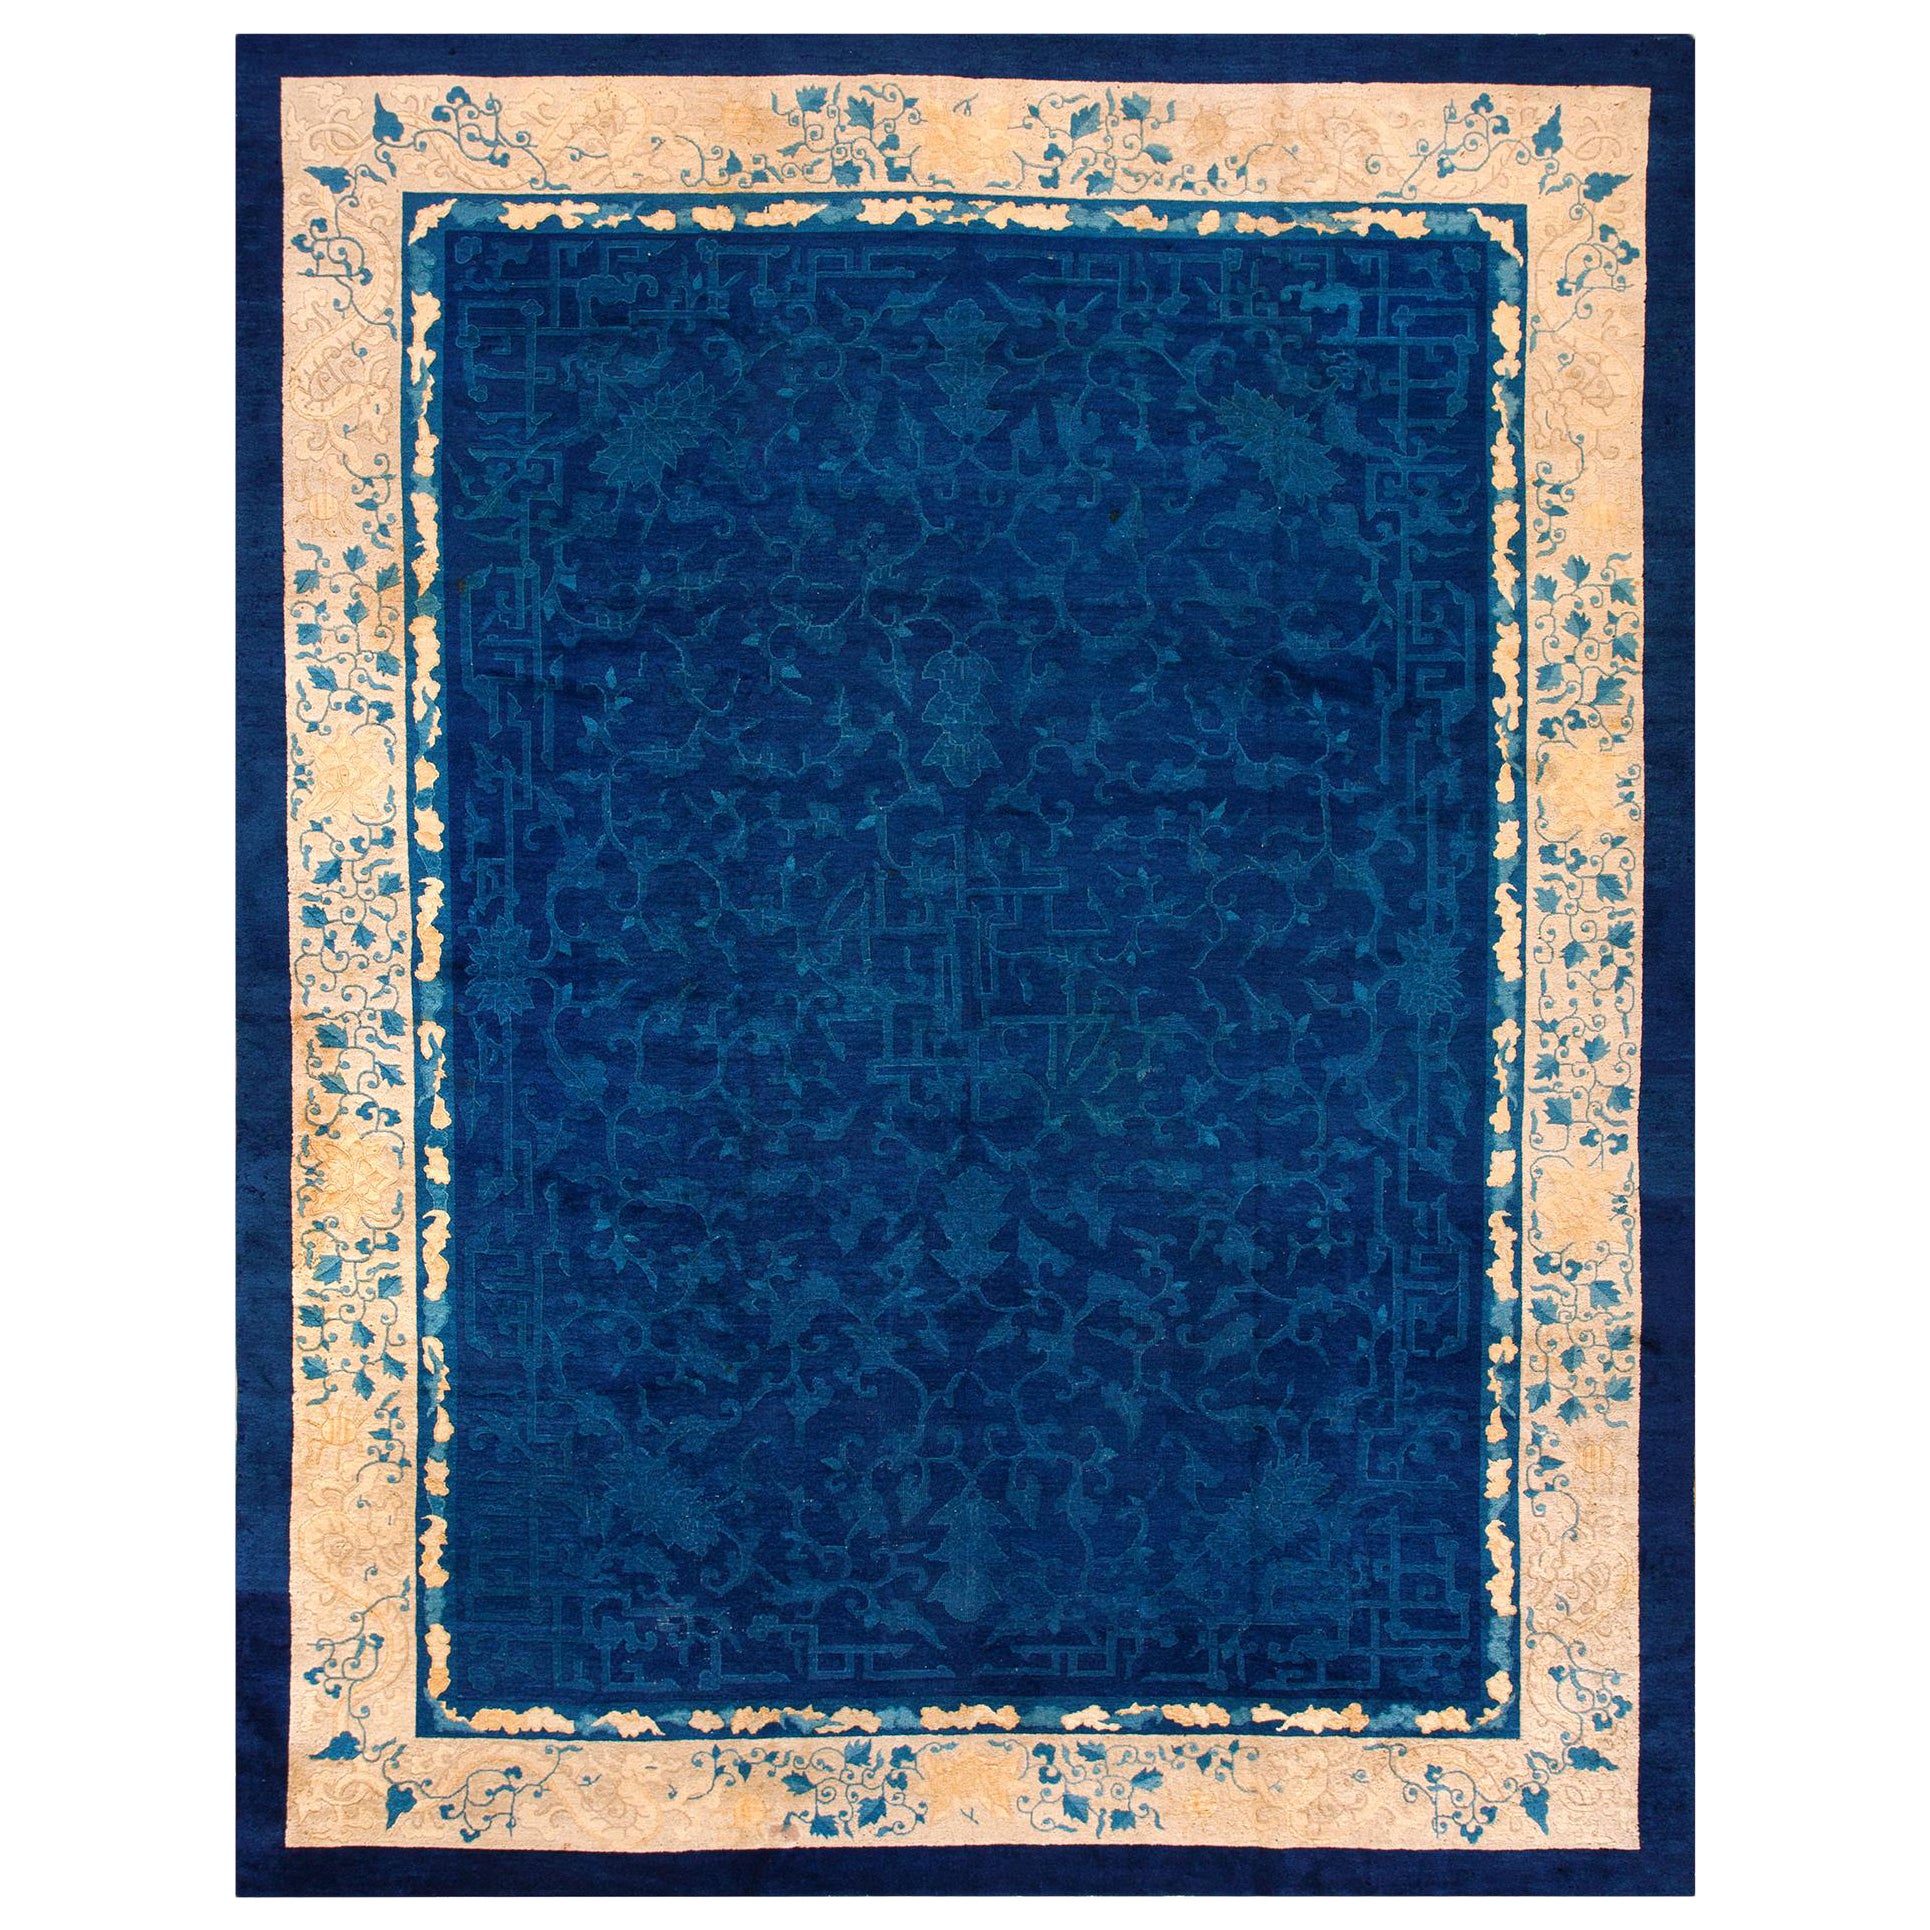 Early 20th Century Chinese Peking Carpet ( 9' x 11'9" - 274 x 358 ) For Sale